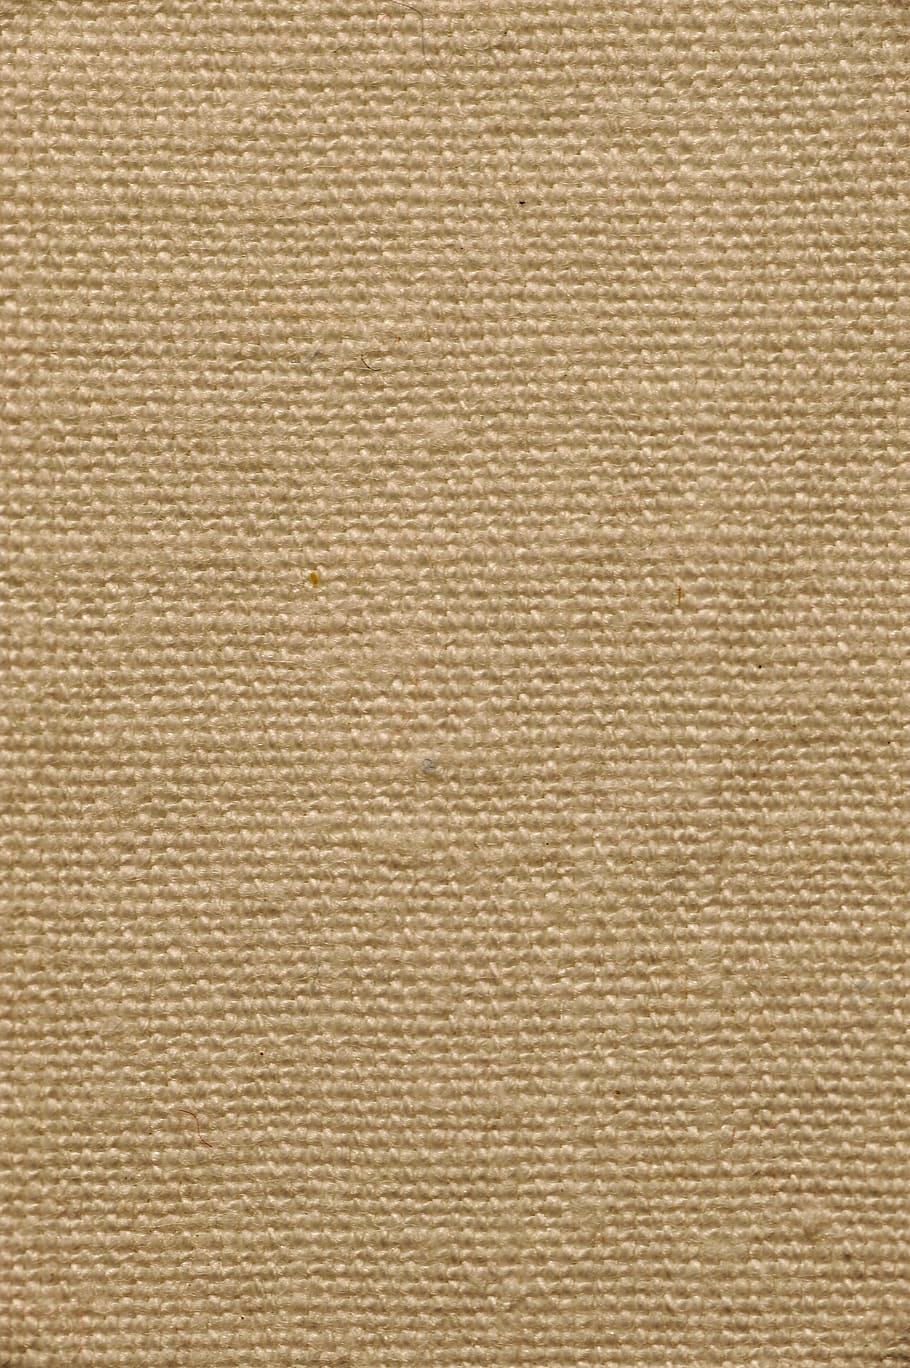 Cross Stitch Texture, abstract, extreme closeup, beige, pattern Free HD Wallpaper